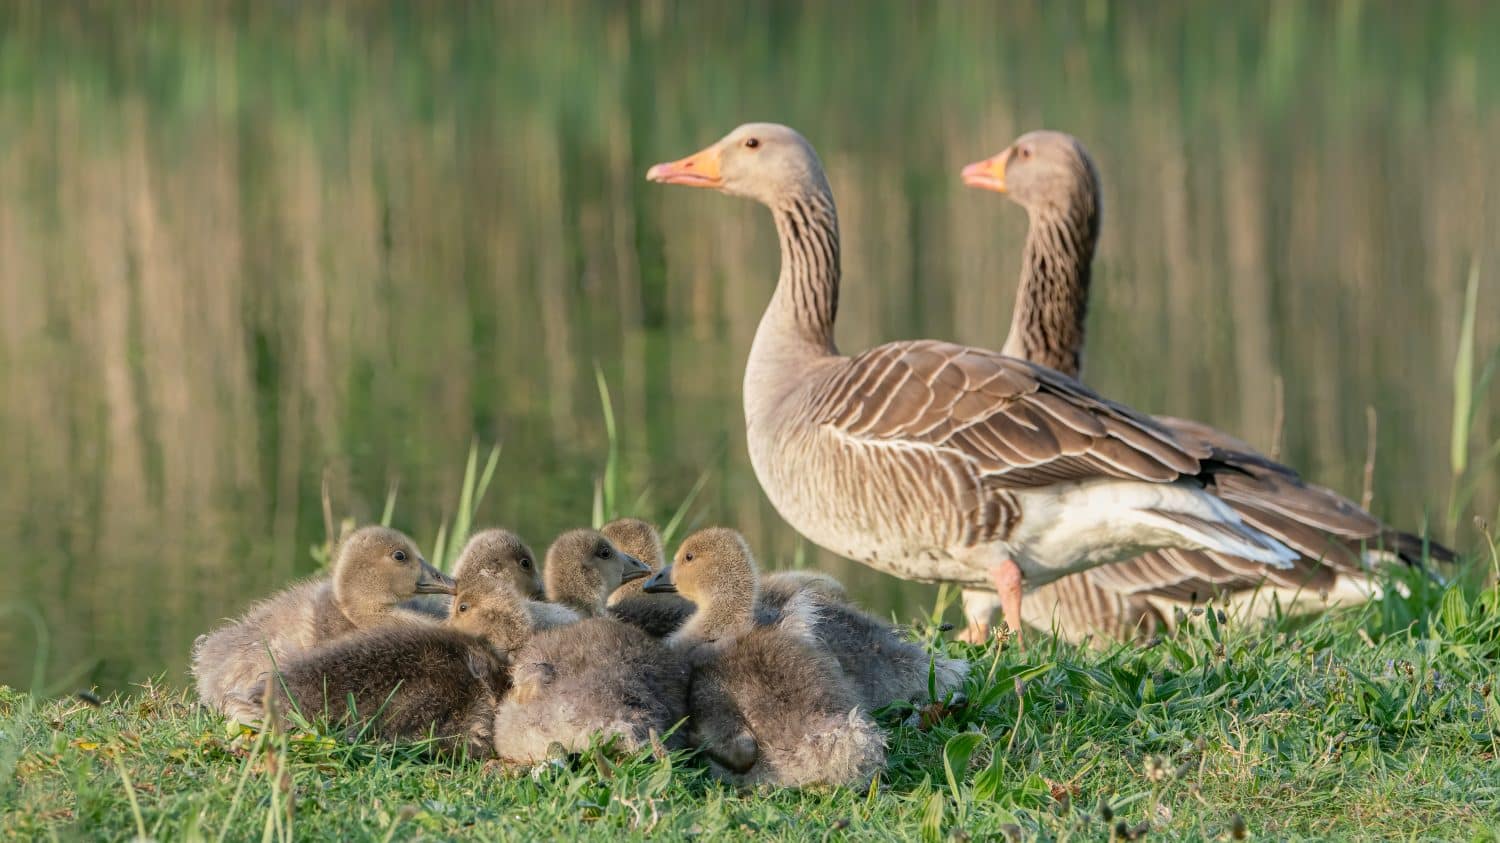 Two parent Greylag Goose (Anser anser) out with their young goslings